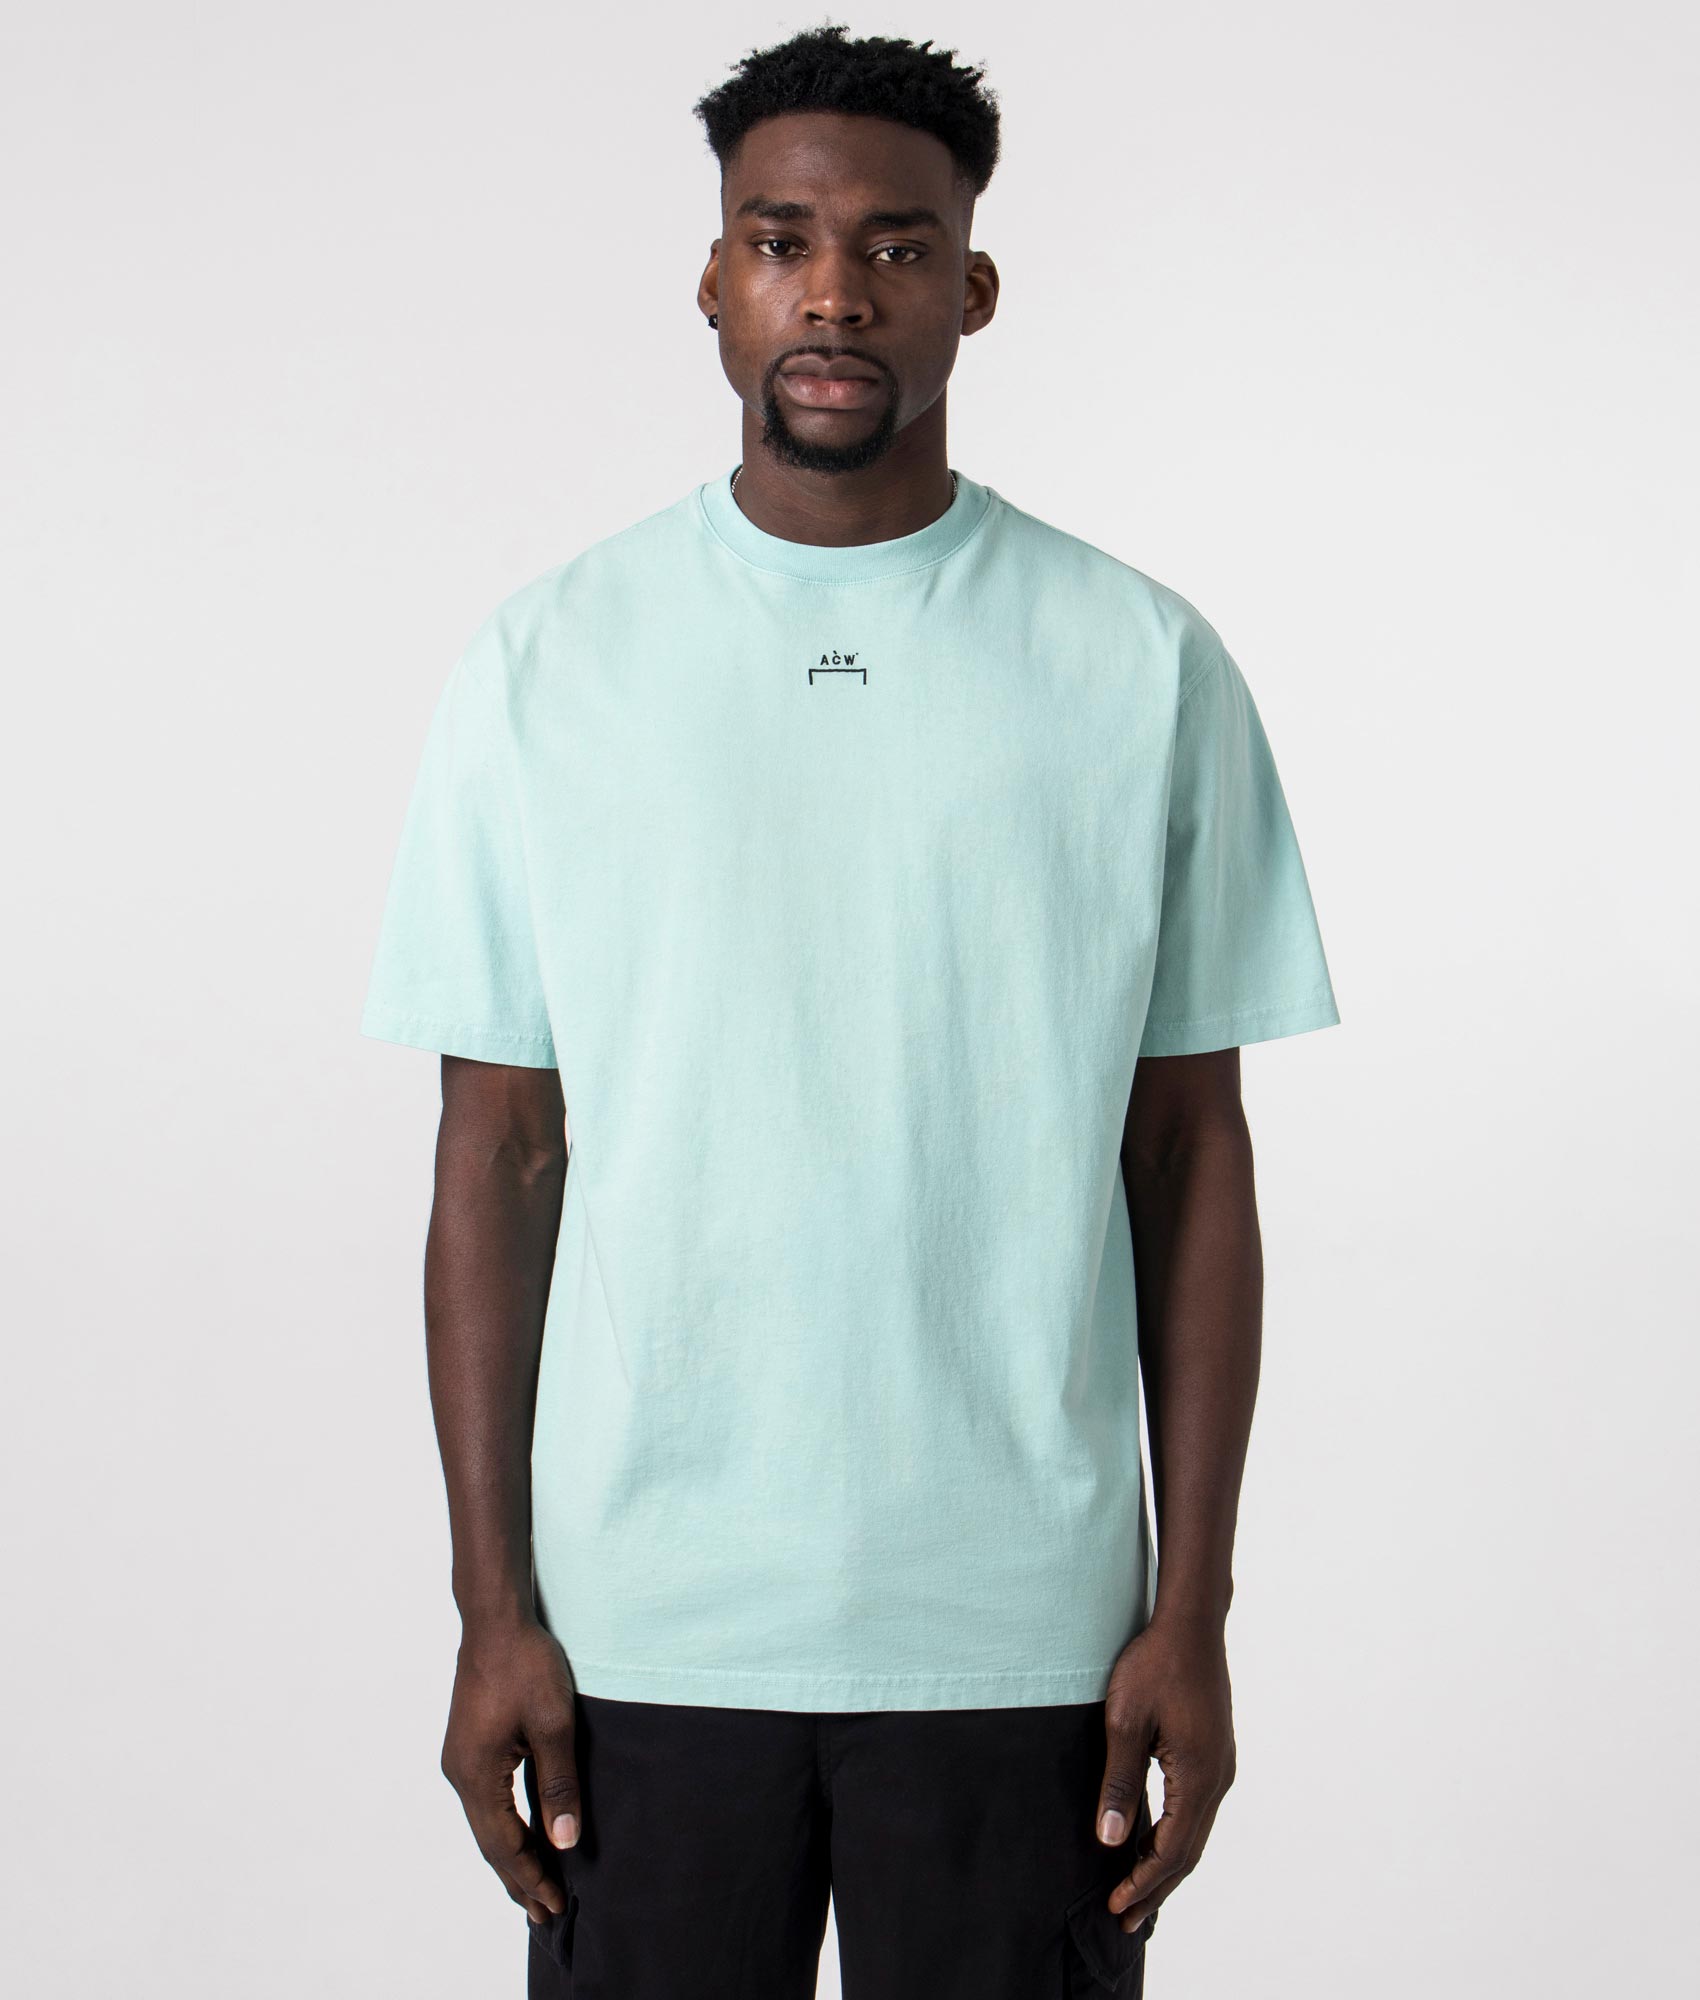 A-COLD-WALL* Mens Relaxed Fit Essential T-Shirt - Colour: Faded Turquoise - Size: XL